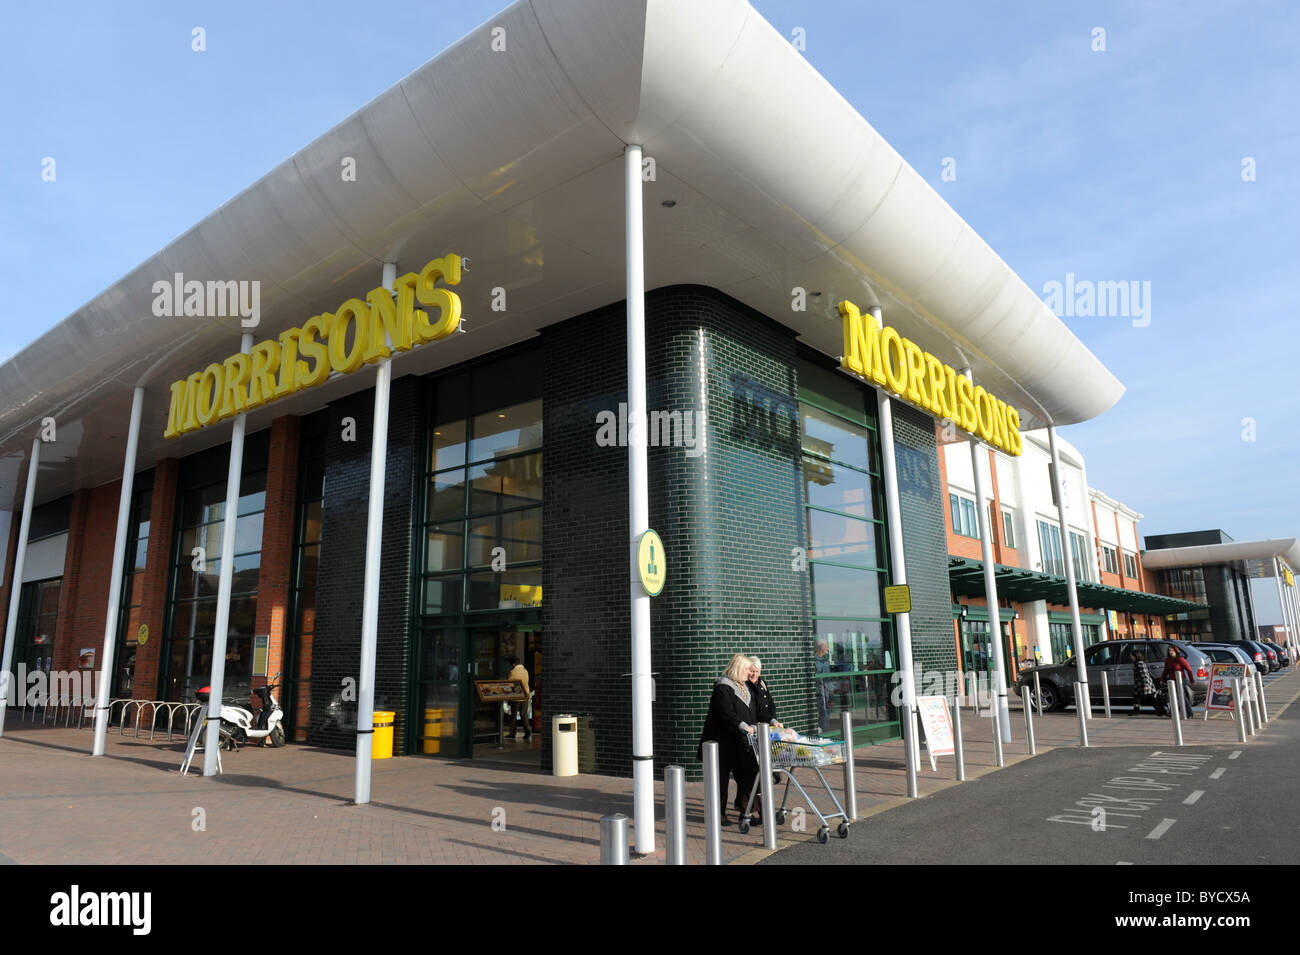 Willenhall in the West Midlands England Uk Morrisons supermarket Stock Photo